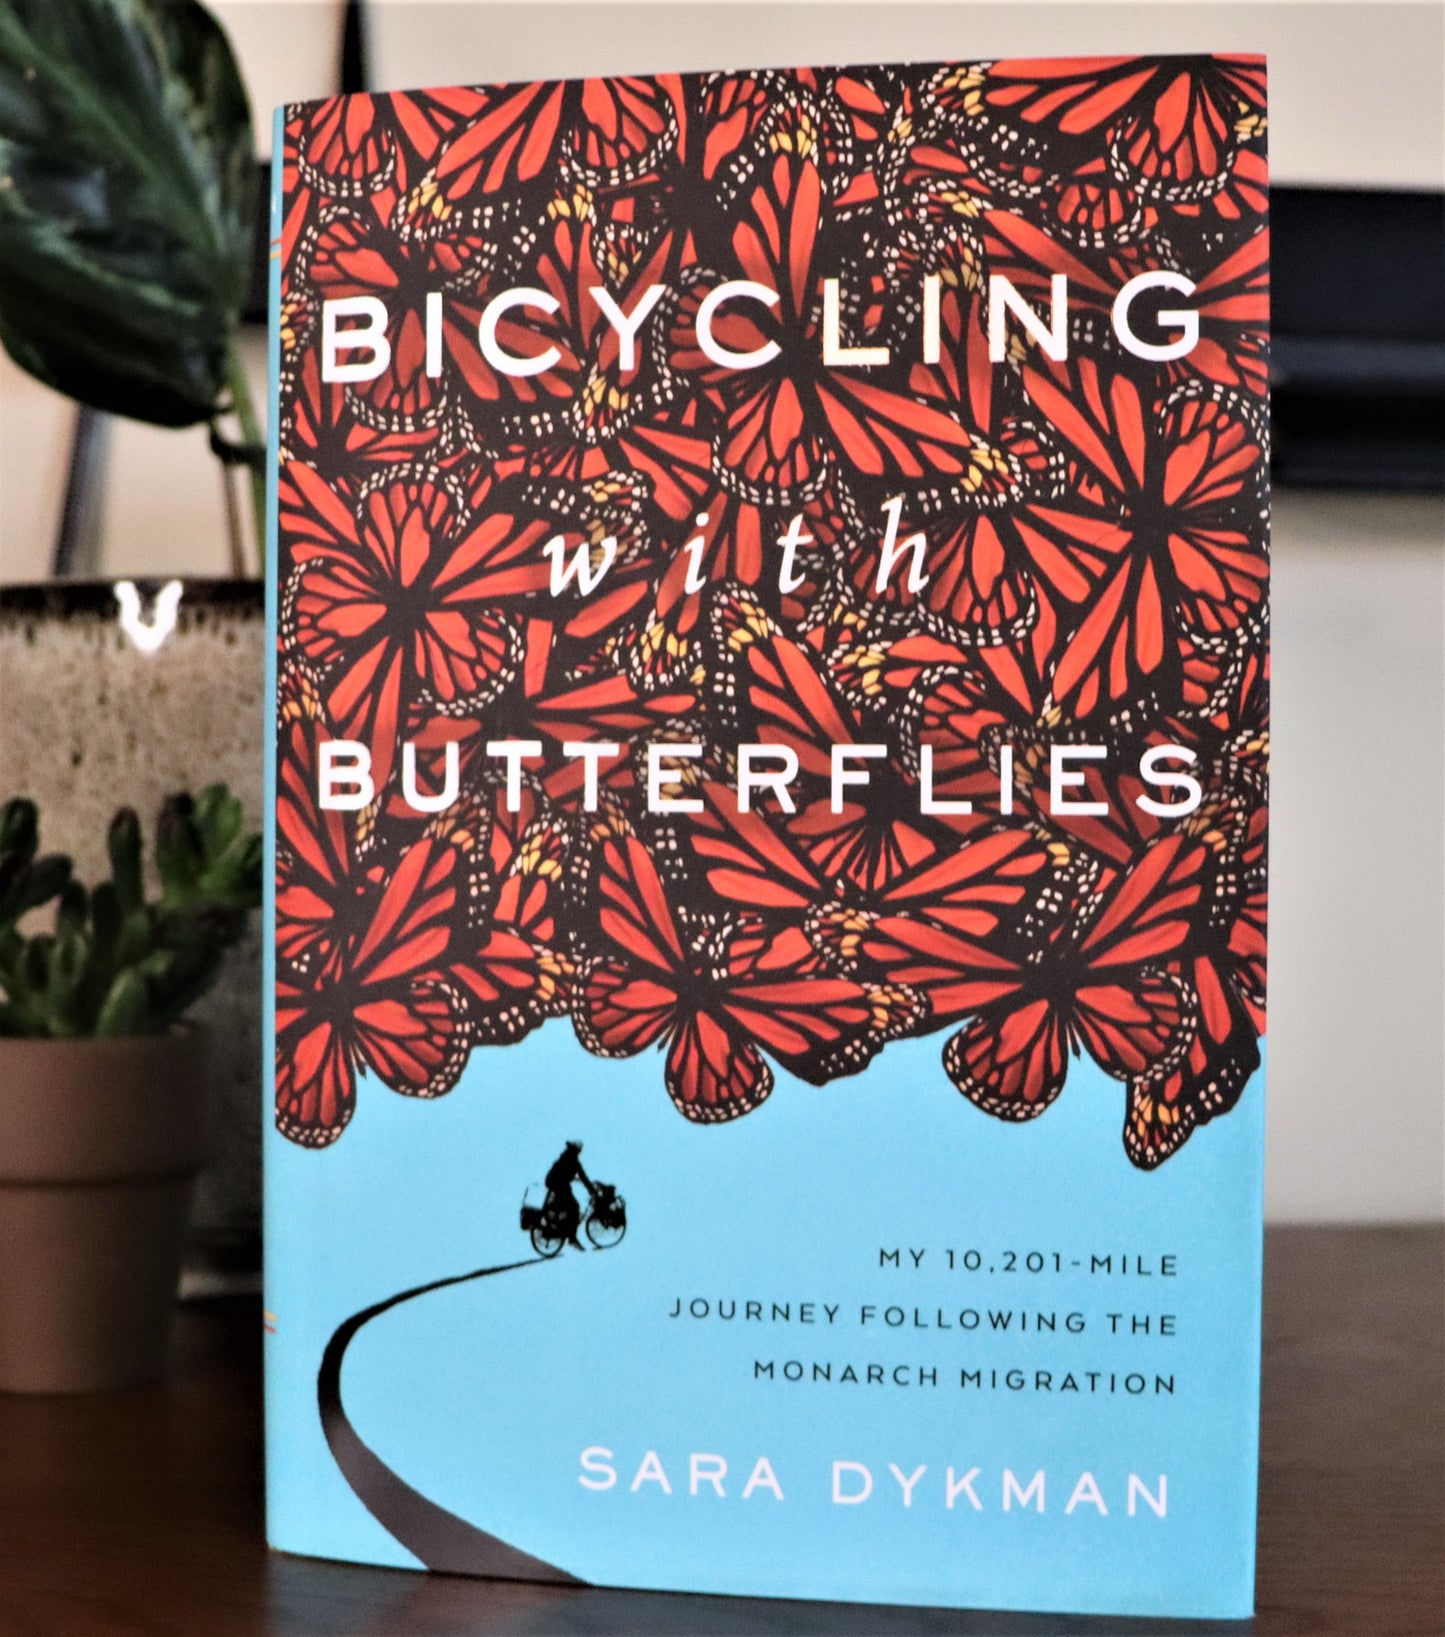 Bicycling with Butterflies